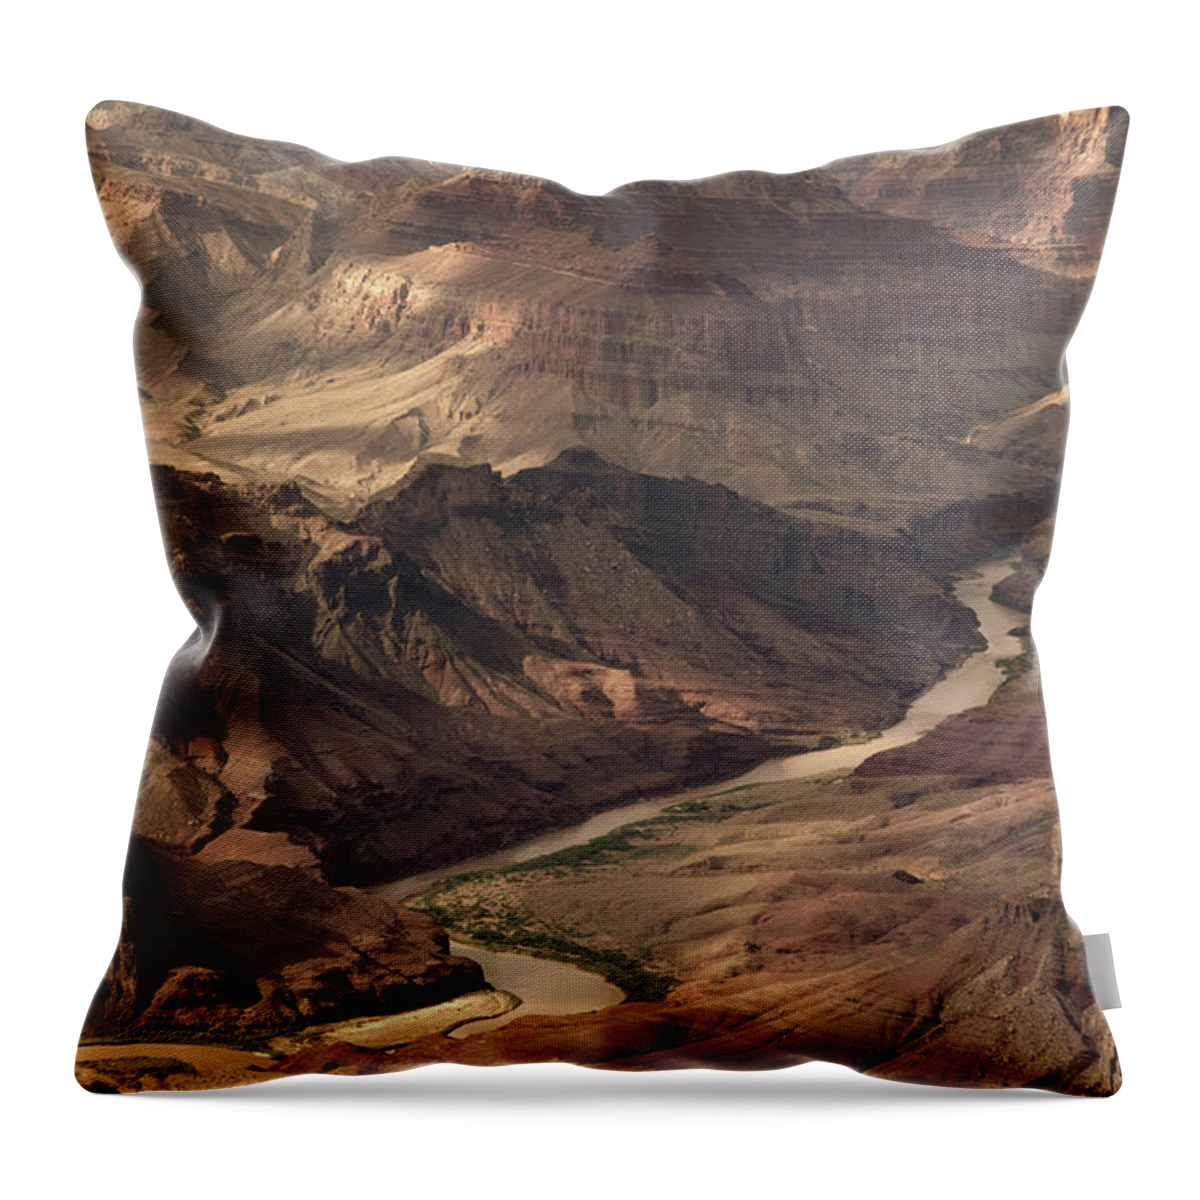 Geology Throw Pillow featuring the photograph Colorado River Running Through Grand by Keiji Iwai